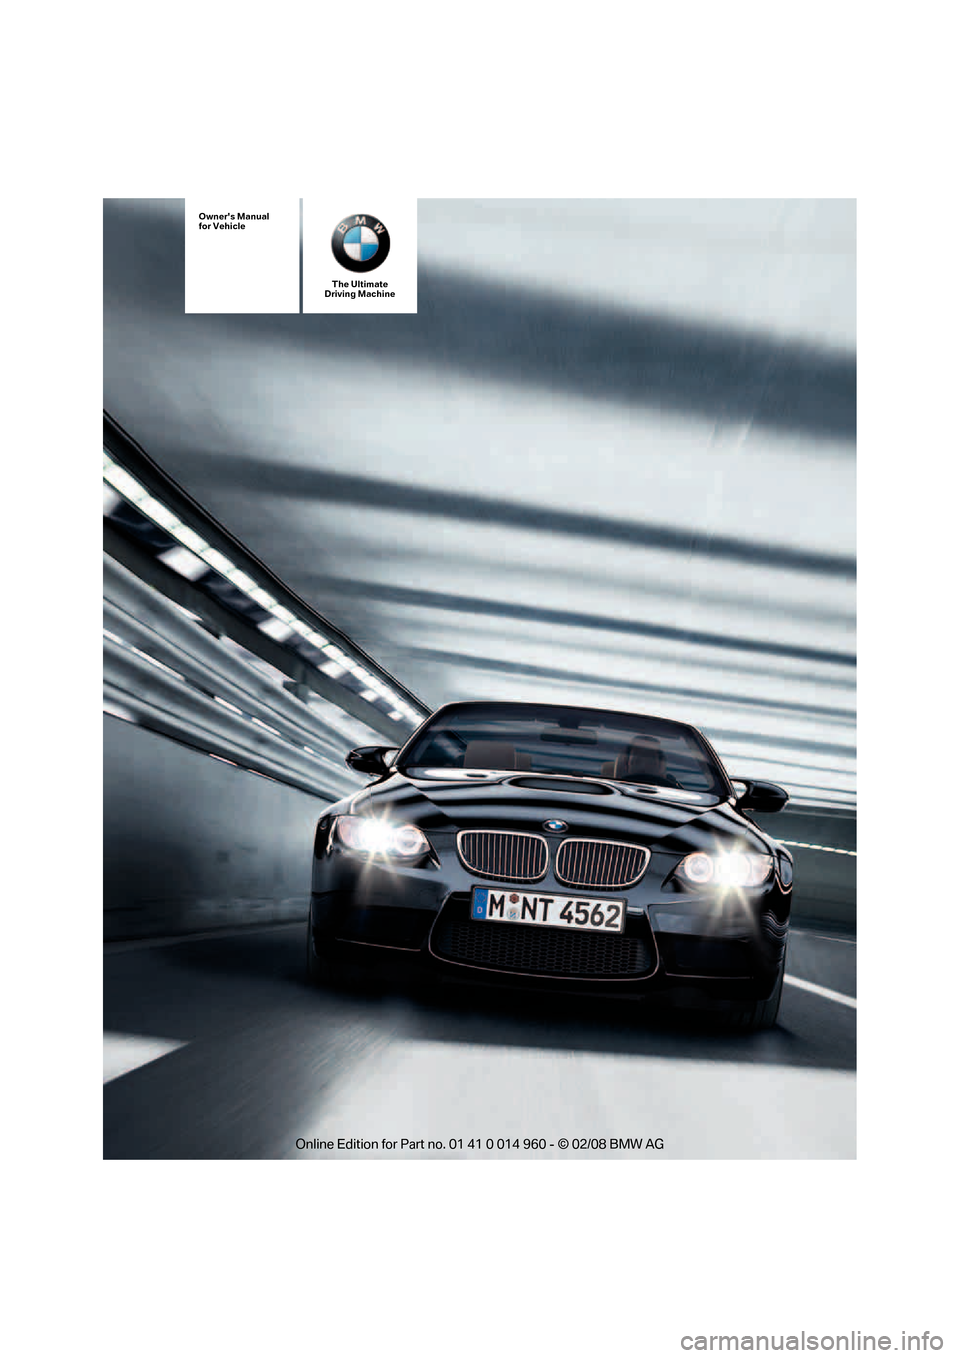 BMW M3 COUPE 2008 E92 Owners Manual The Ultimate
Driving Machine
Owners Manual
for Vehicle 